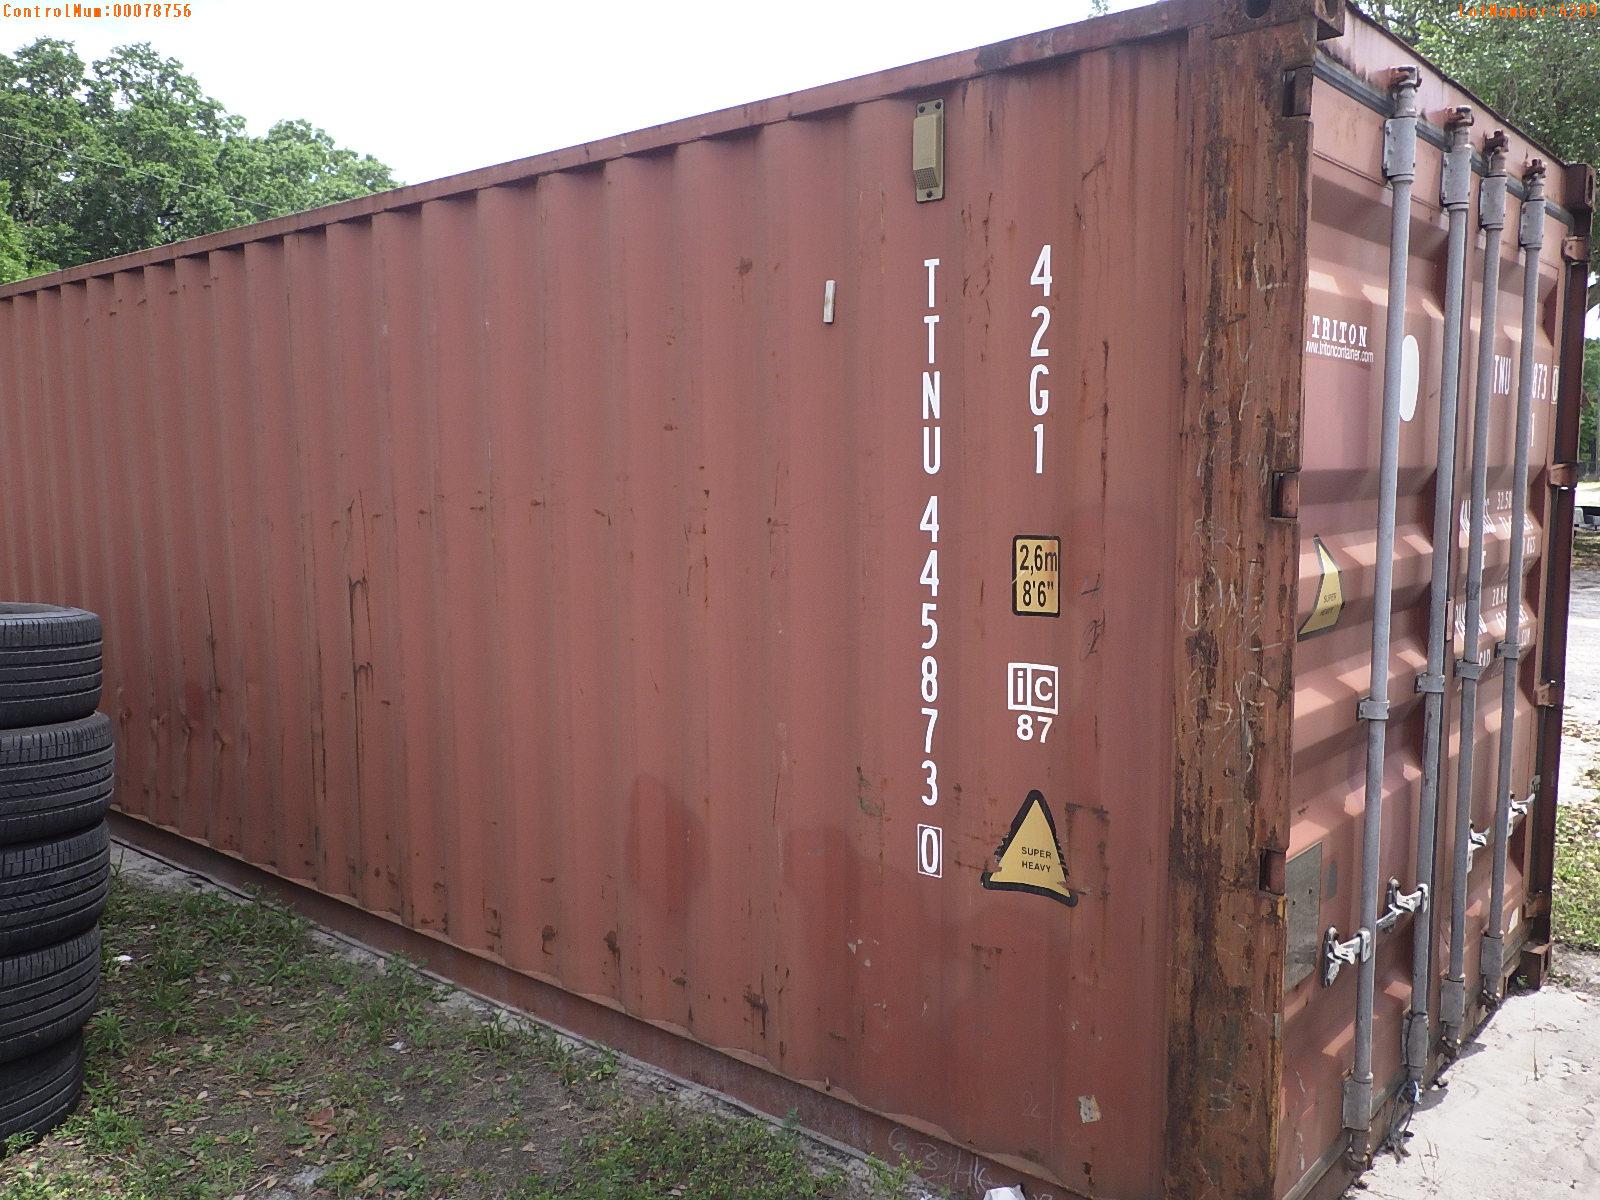 4-04289 (Equip.-Container)  Seller:Private/Dealer TRITON 40 FOOT METAL SHIPPING